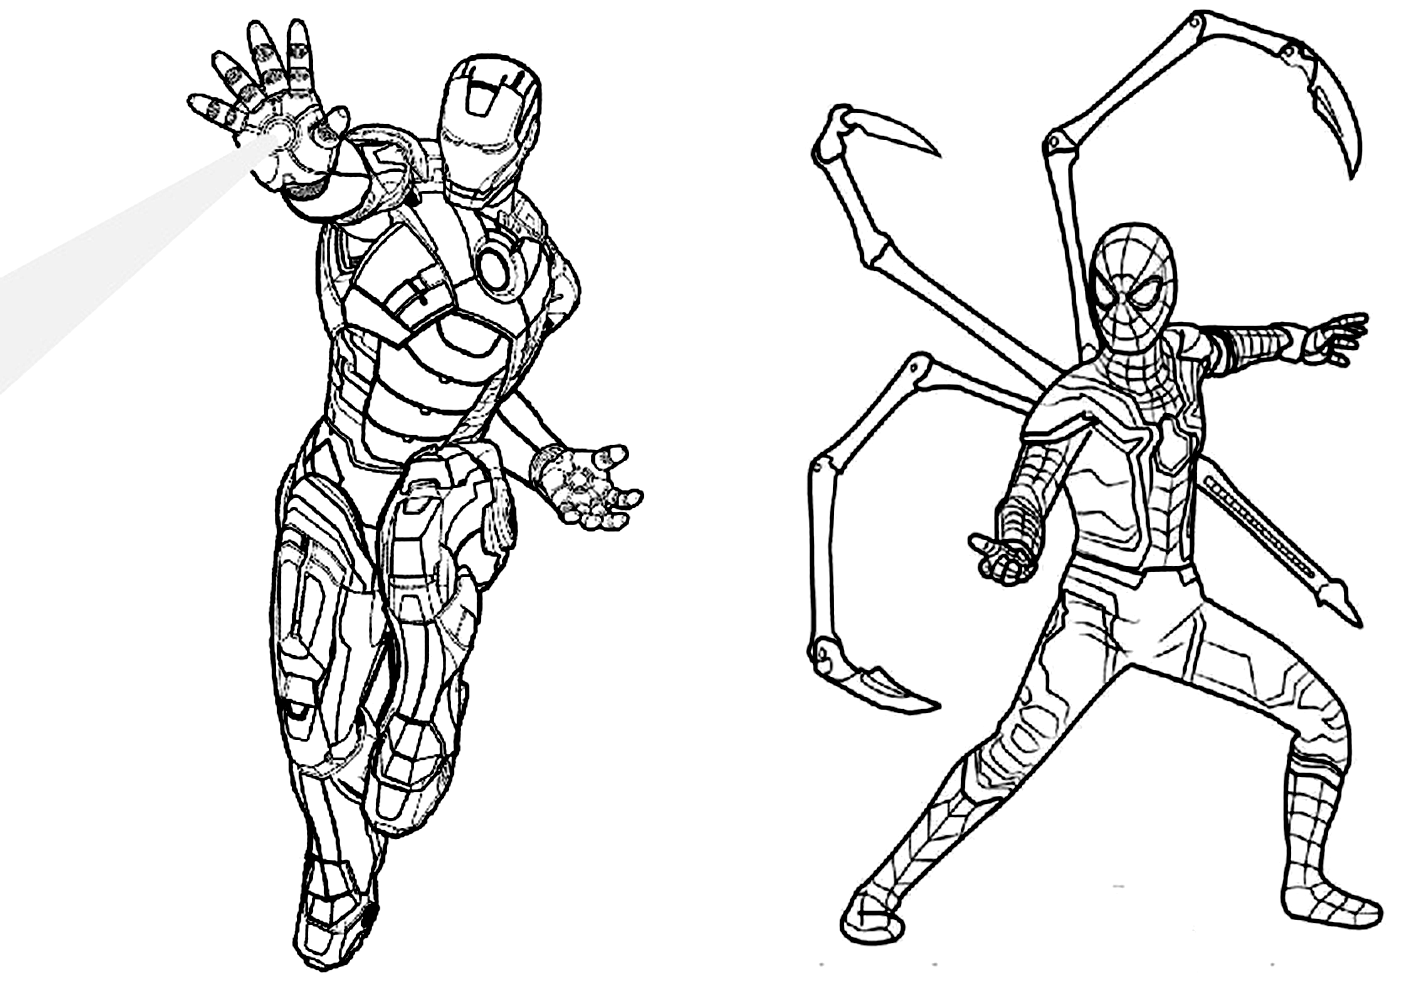 Iron Spider and Iron man Coloring Page